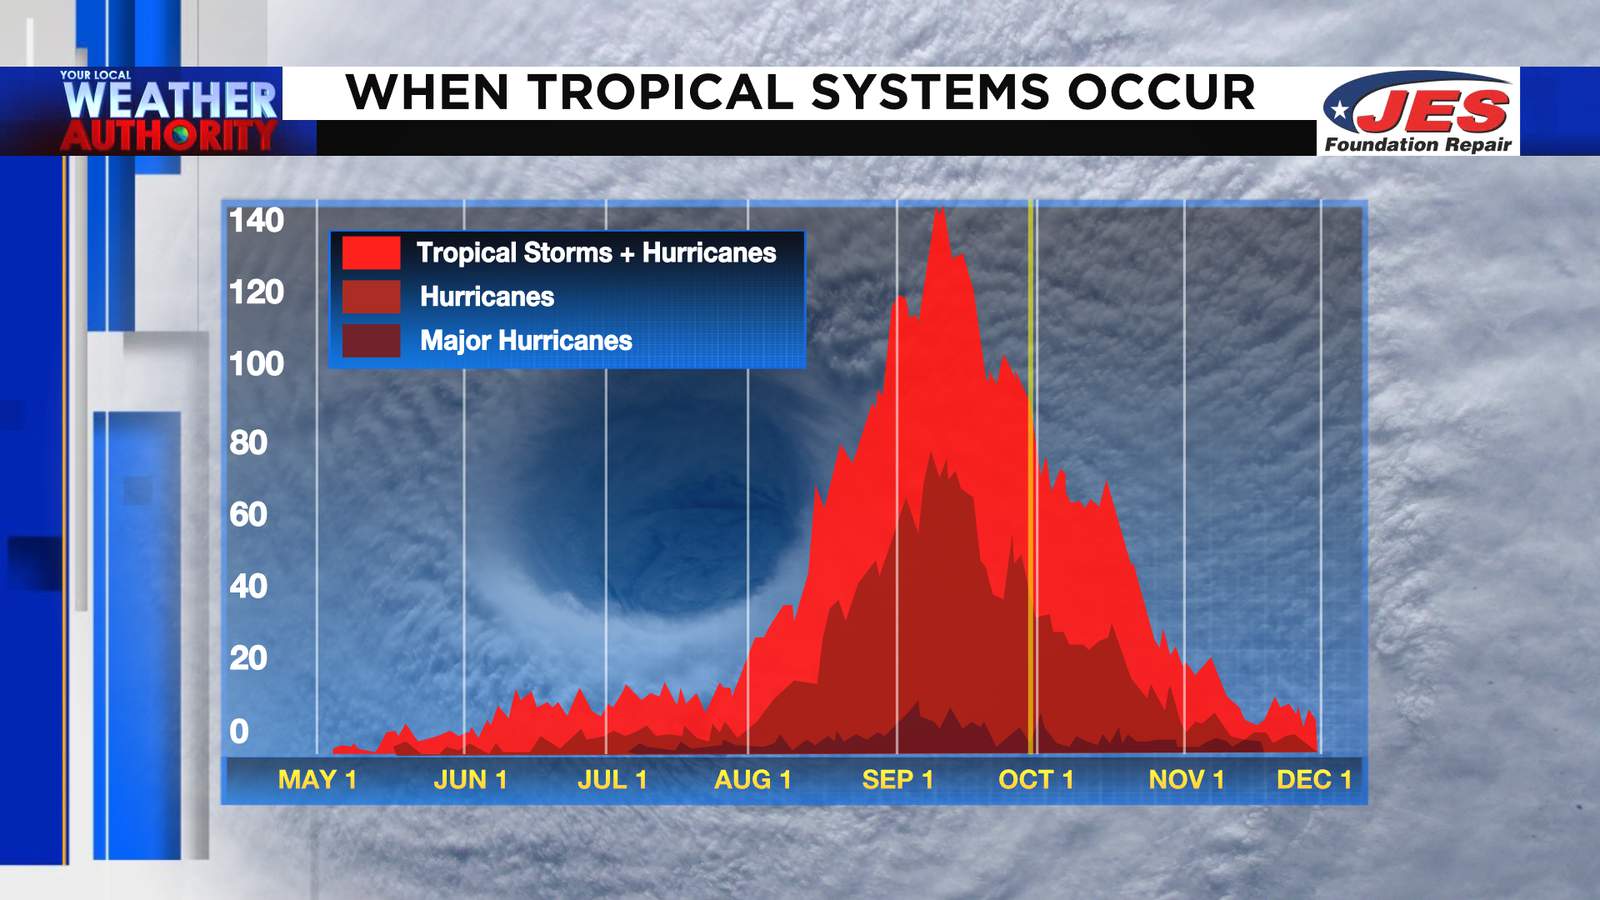 Beyond The Forecast: With two months left in hurricane season, what’s next?